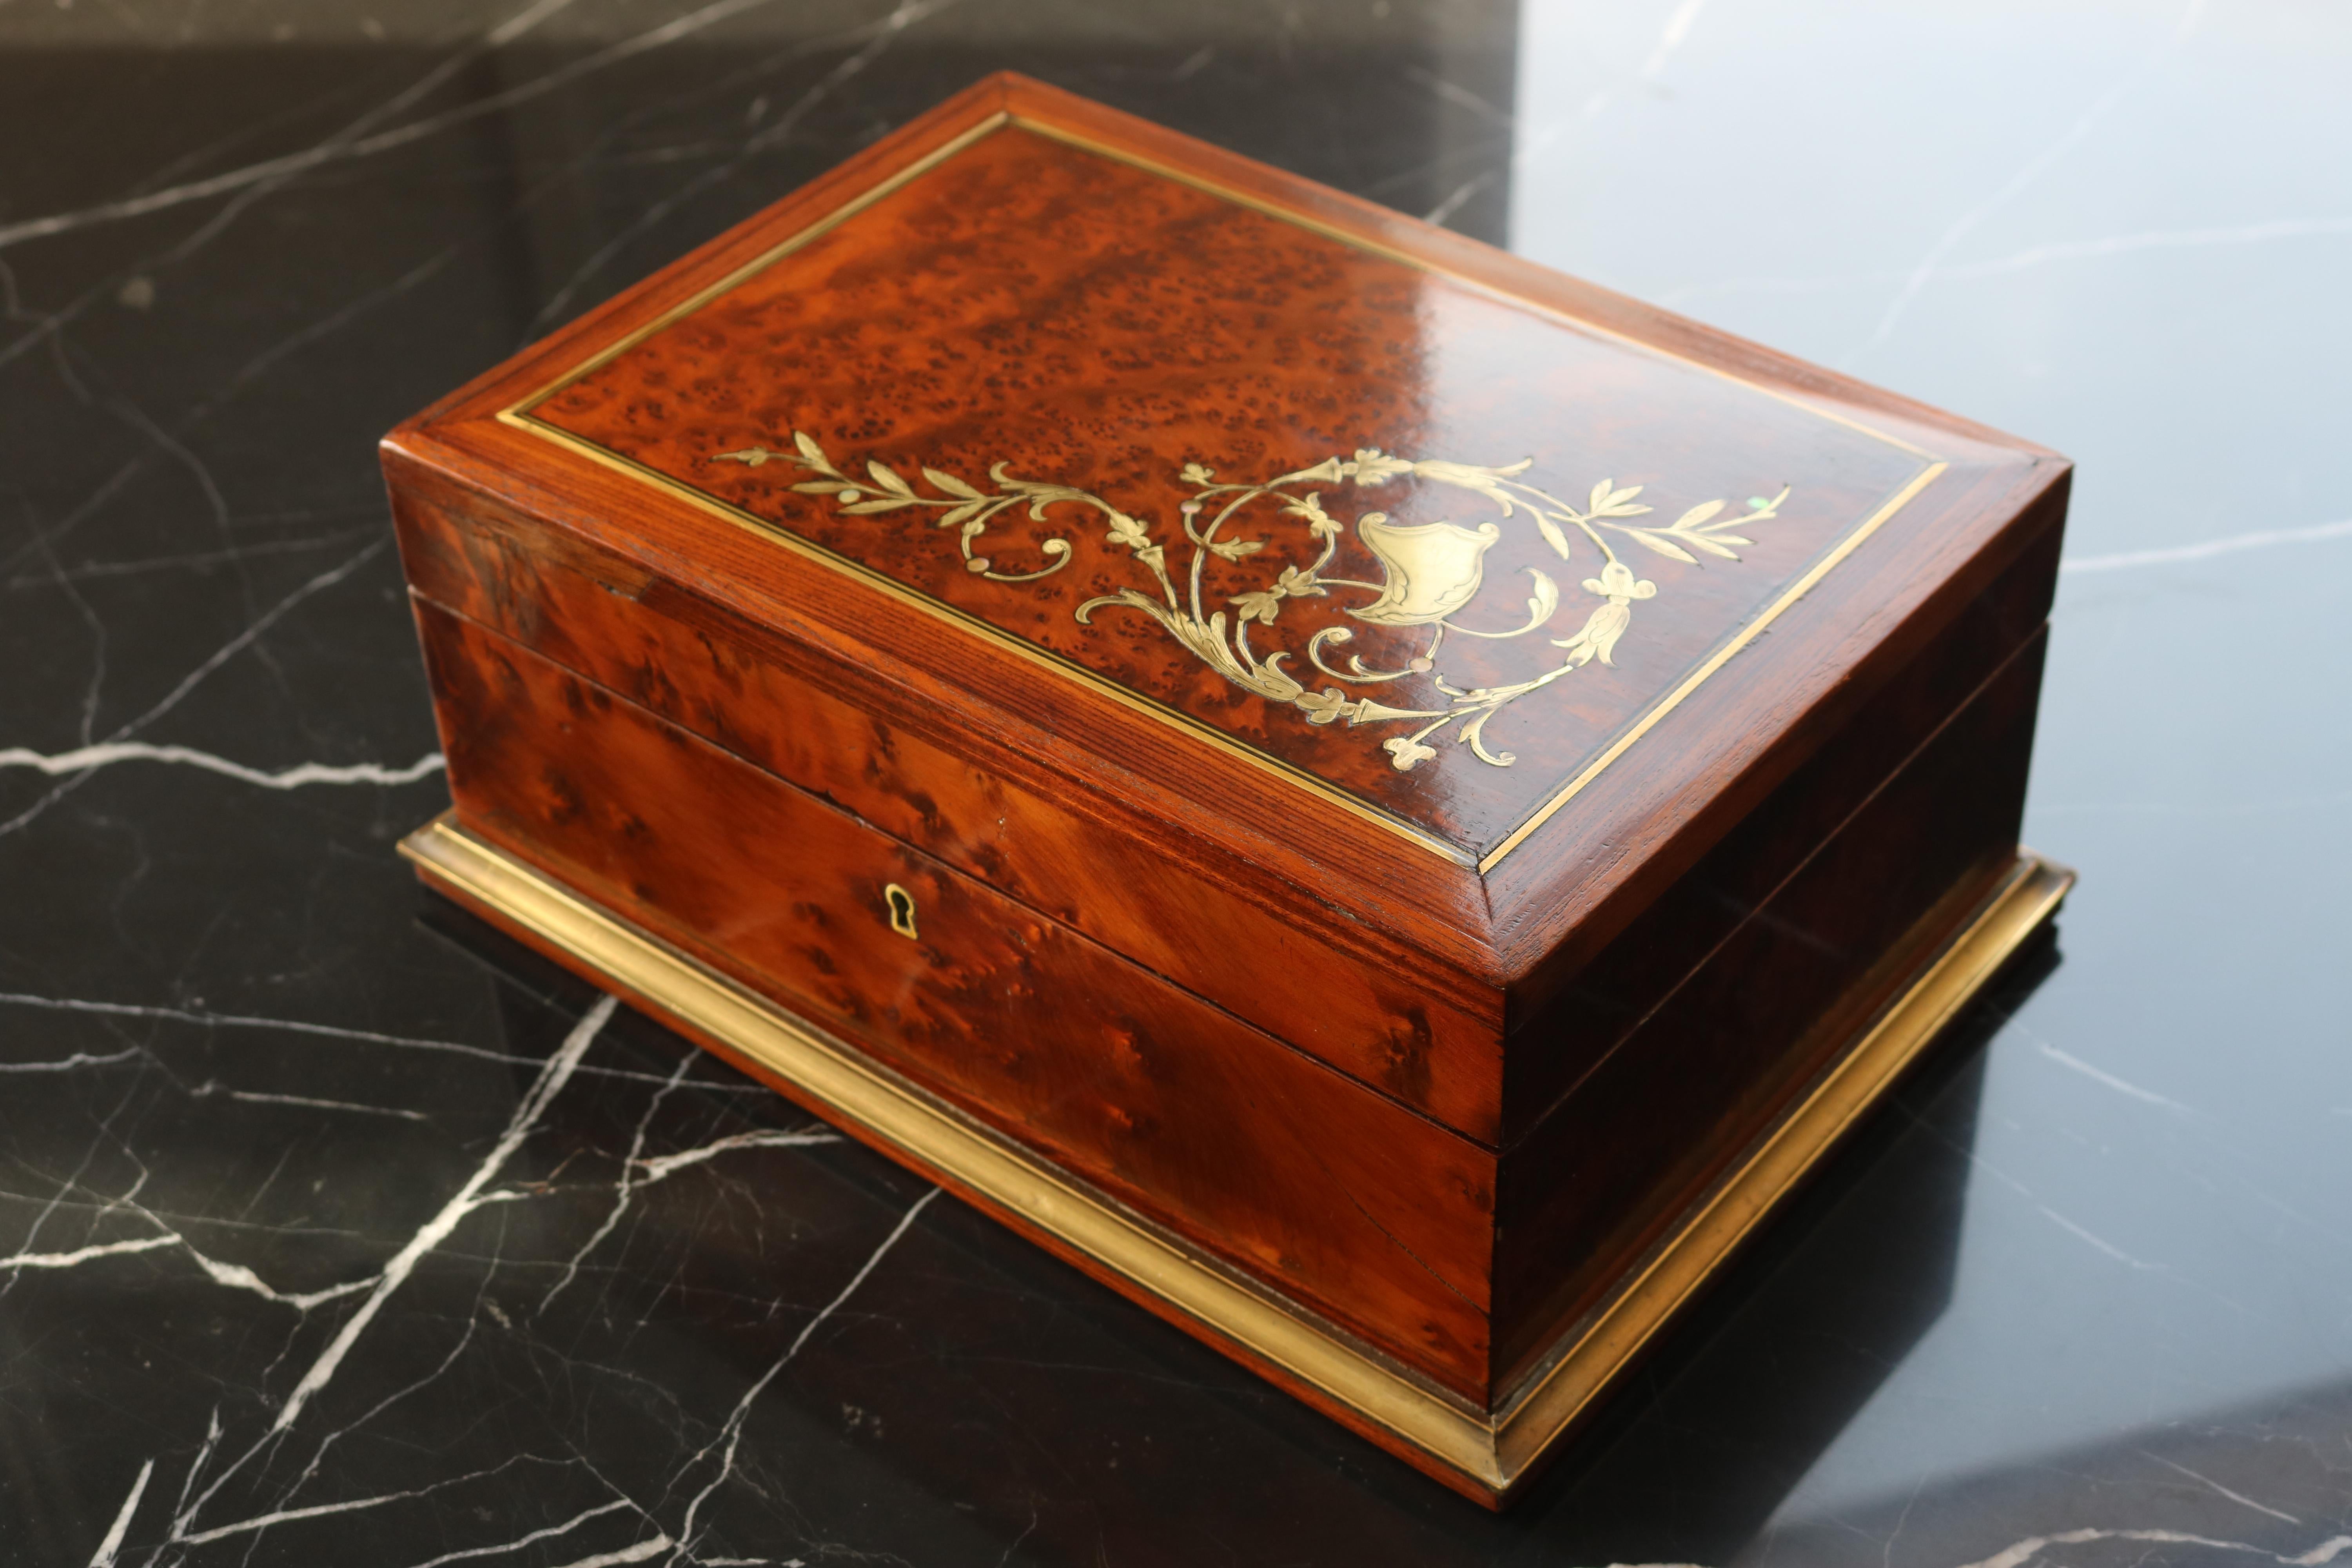 Gorgeous antique French Napoleon III 19th century jewelry box in burl wood with brass & mother of pearl inlay. 
Amazing craftsmanship this brass inlaid jewelry Box signed with a ''R